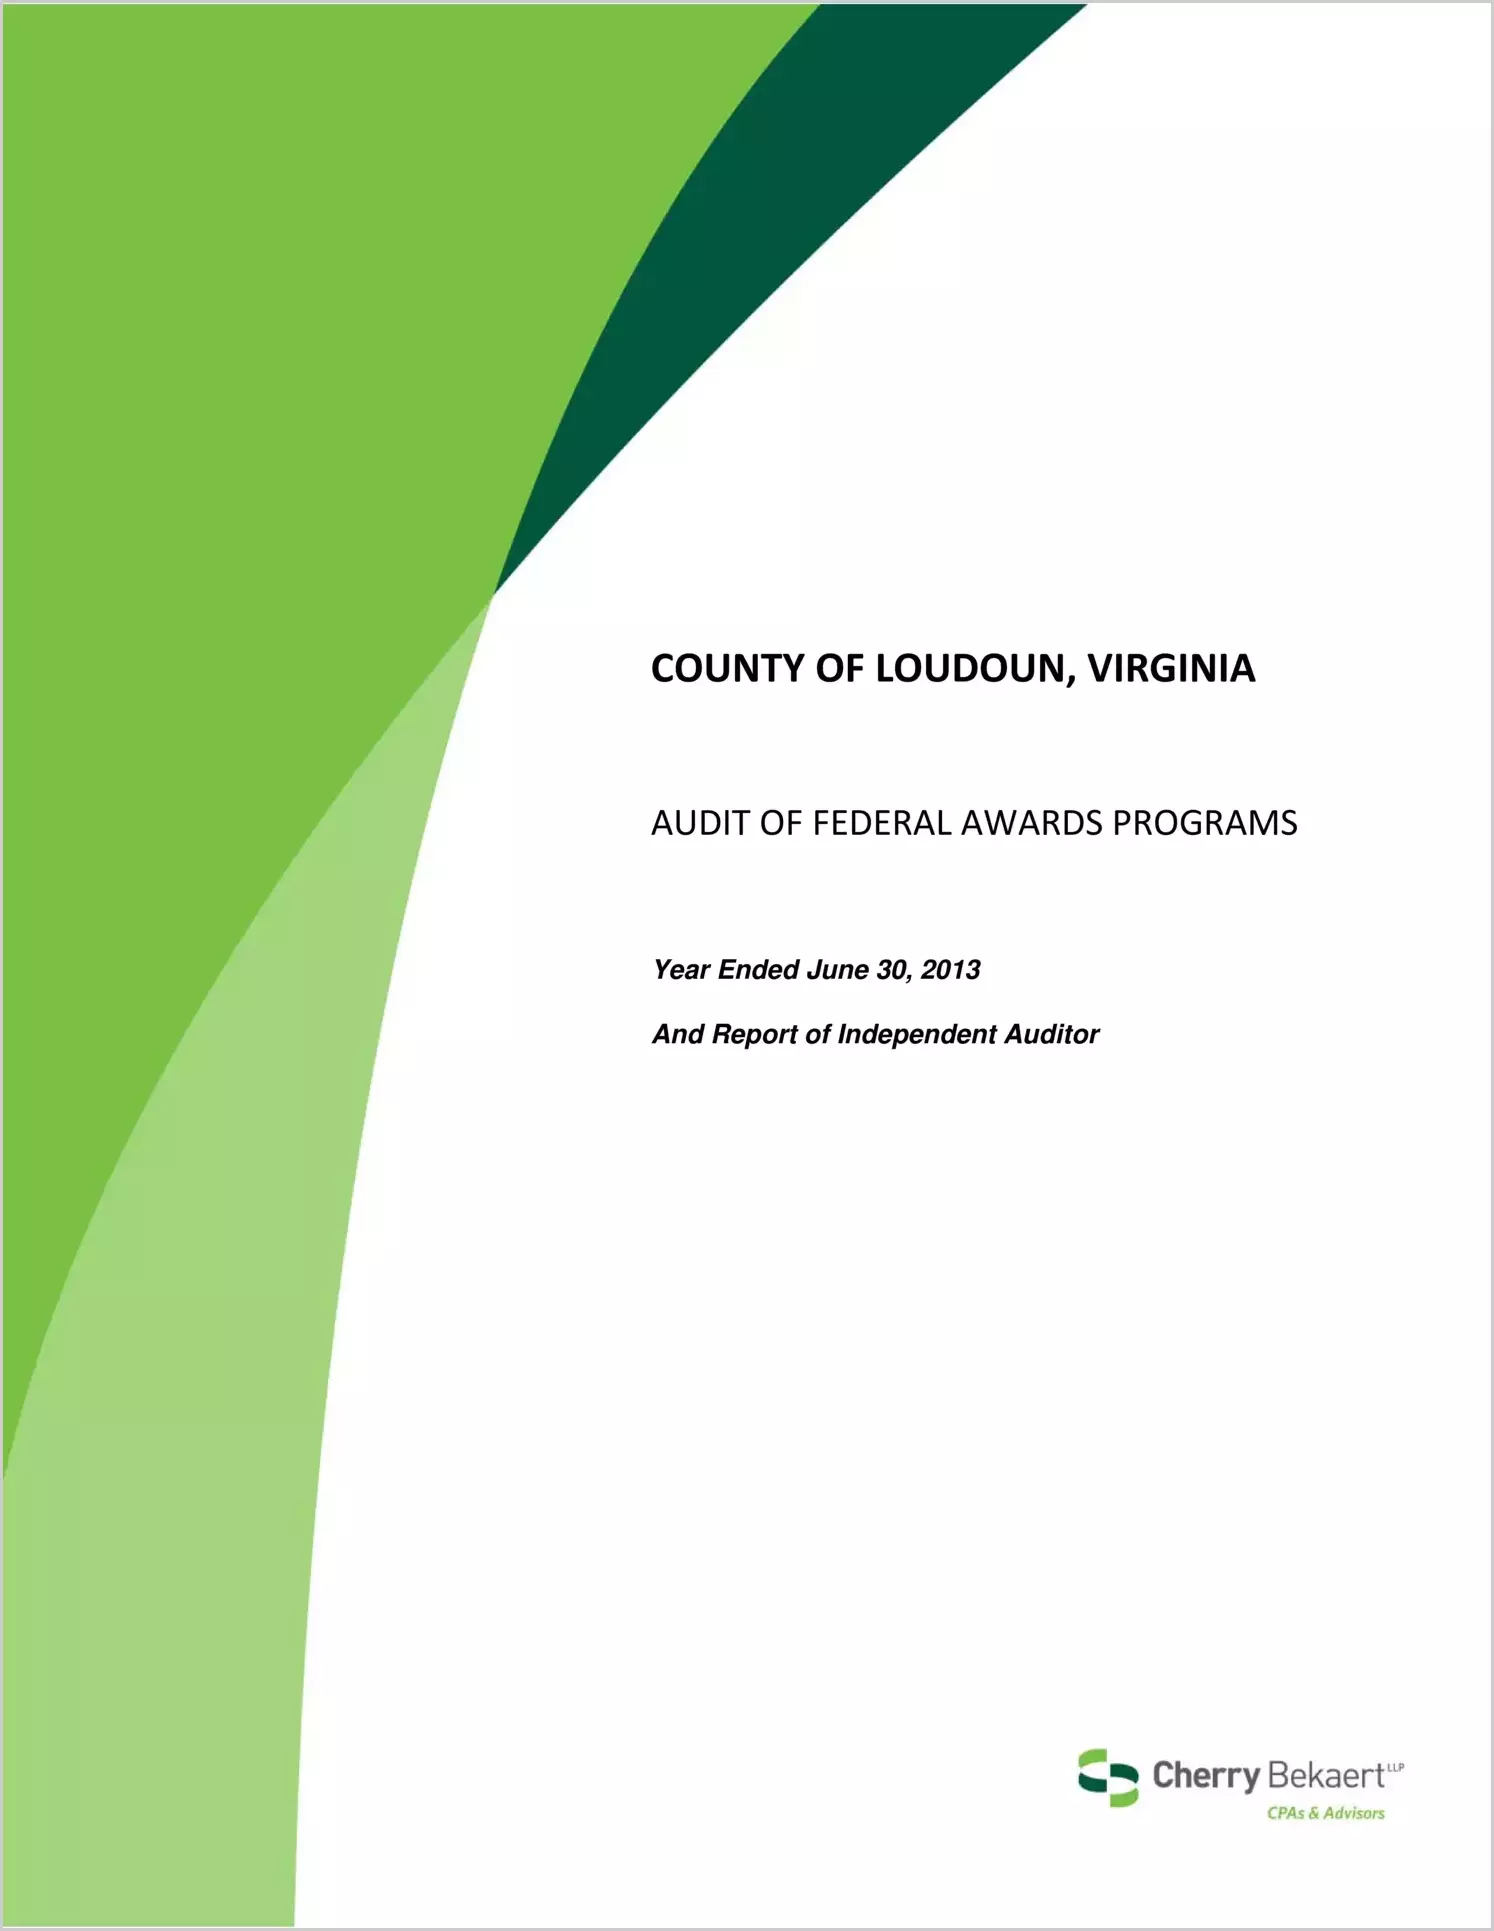 2013 Internal Control and Compliance Report for County of Loudoun